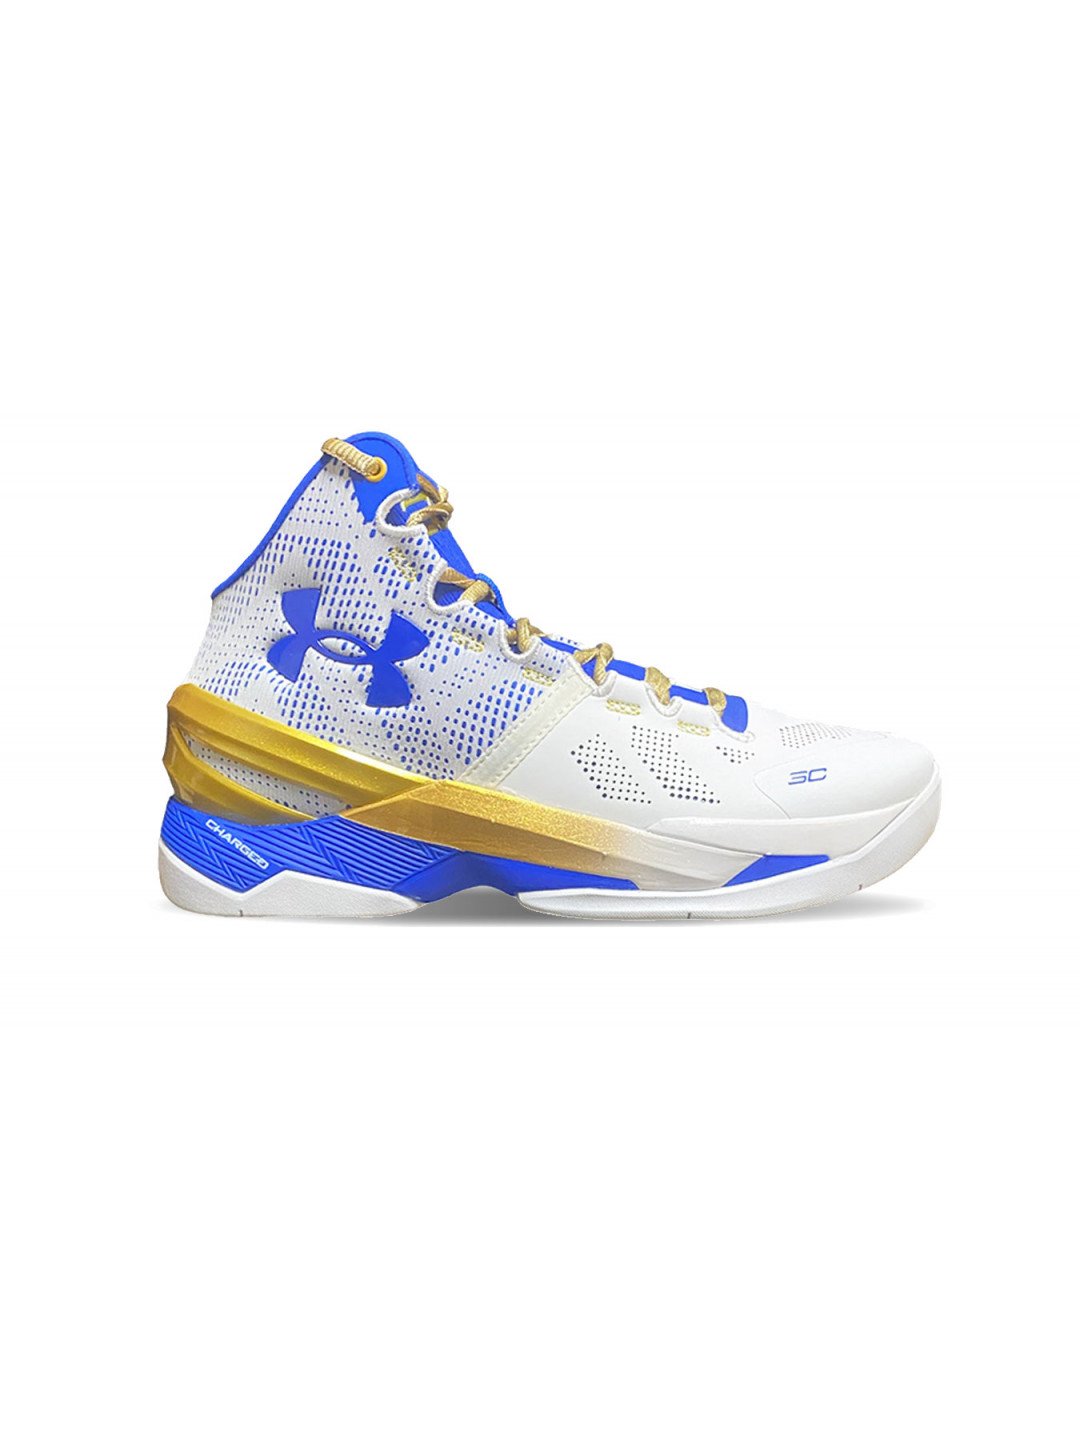 Under Armour Curry 2 NM White